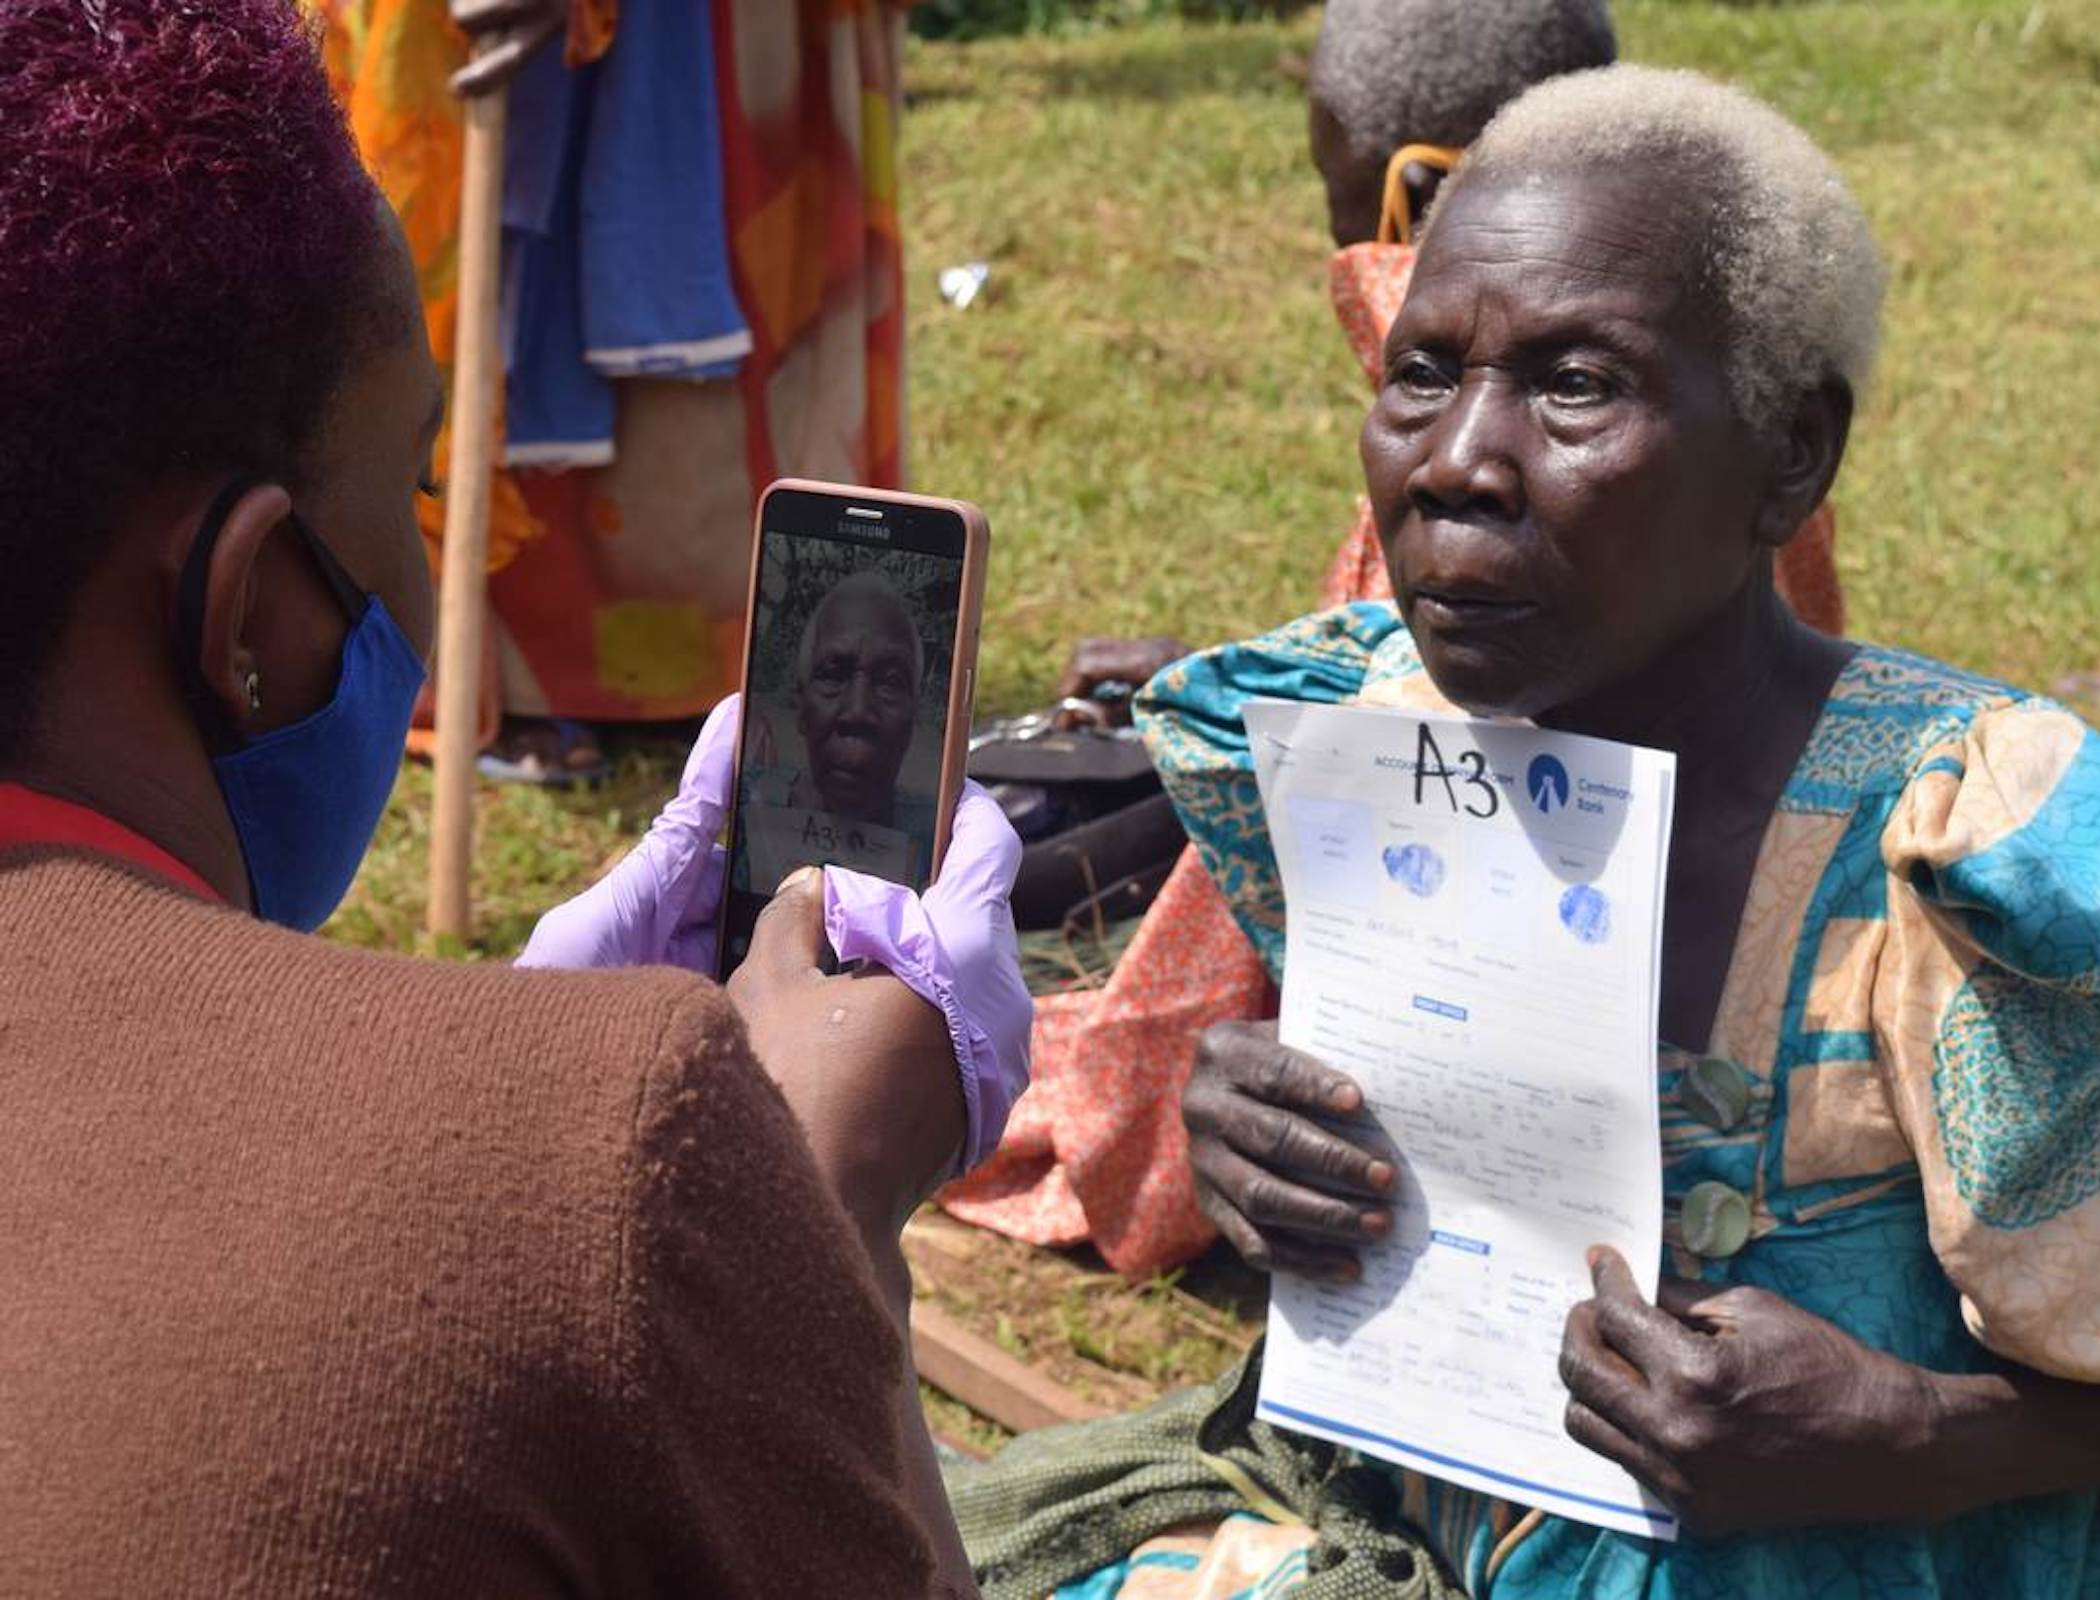 Uganda government sued over digital ID system that excludes vulnerable groups